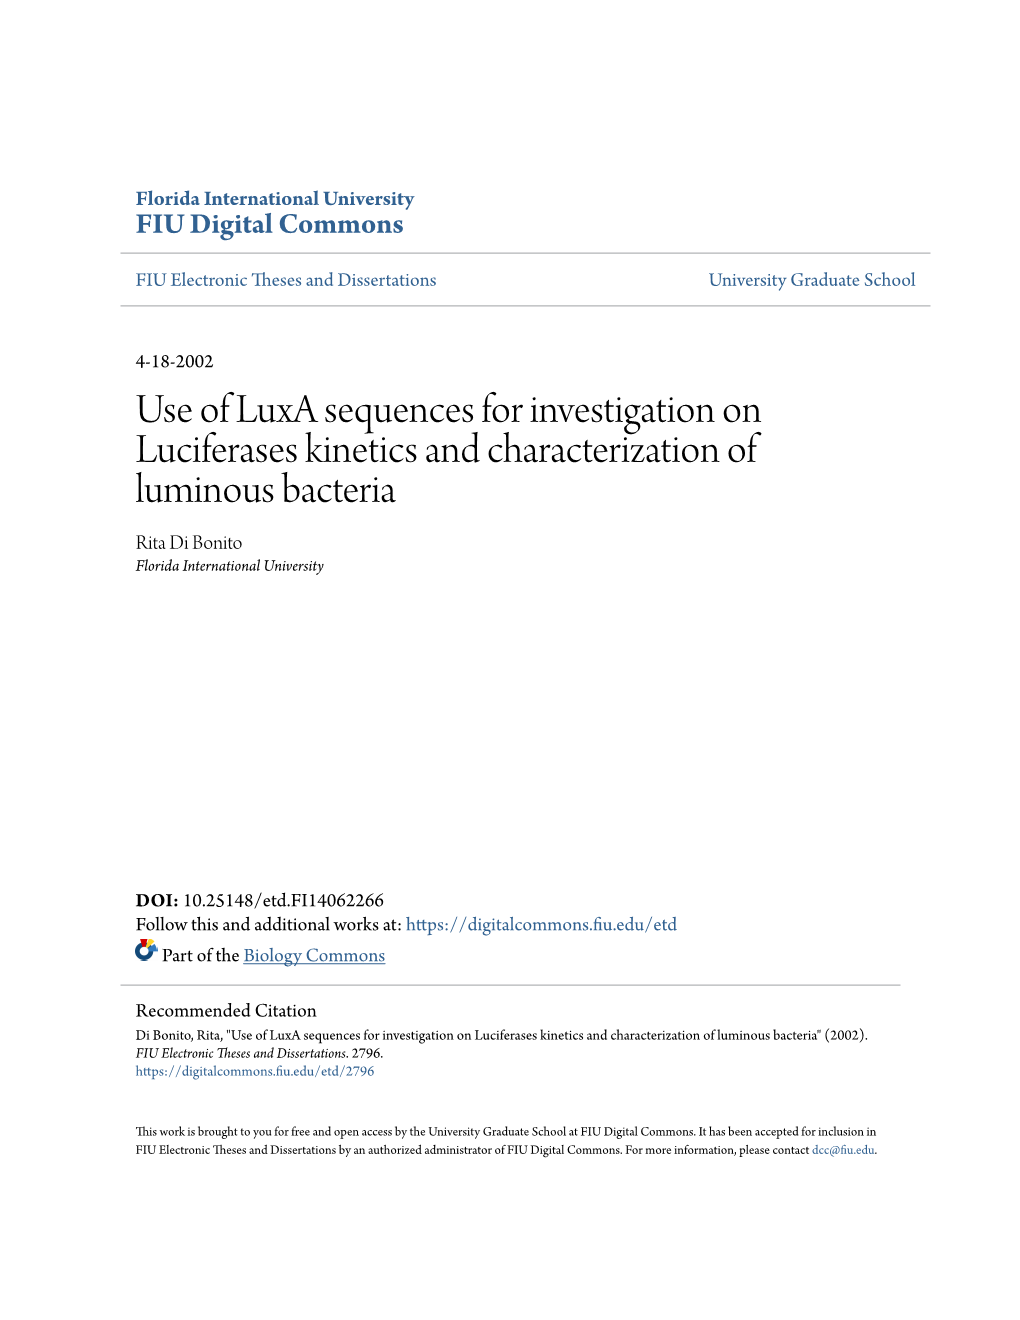 Use of Luxa Sequences for Investigation on Luciferases Kinetics and Characterization of Luminous Bacteria Rita Di Bonito Florida International University